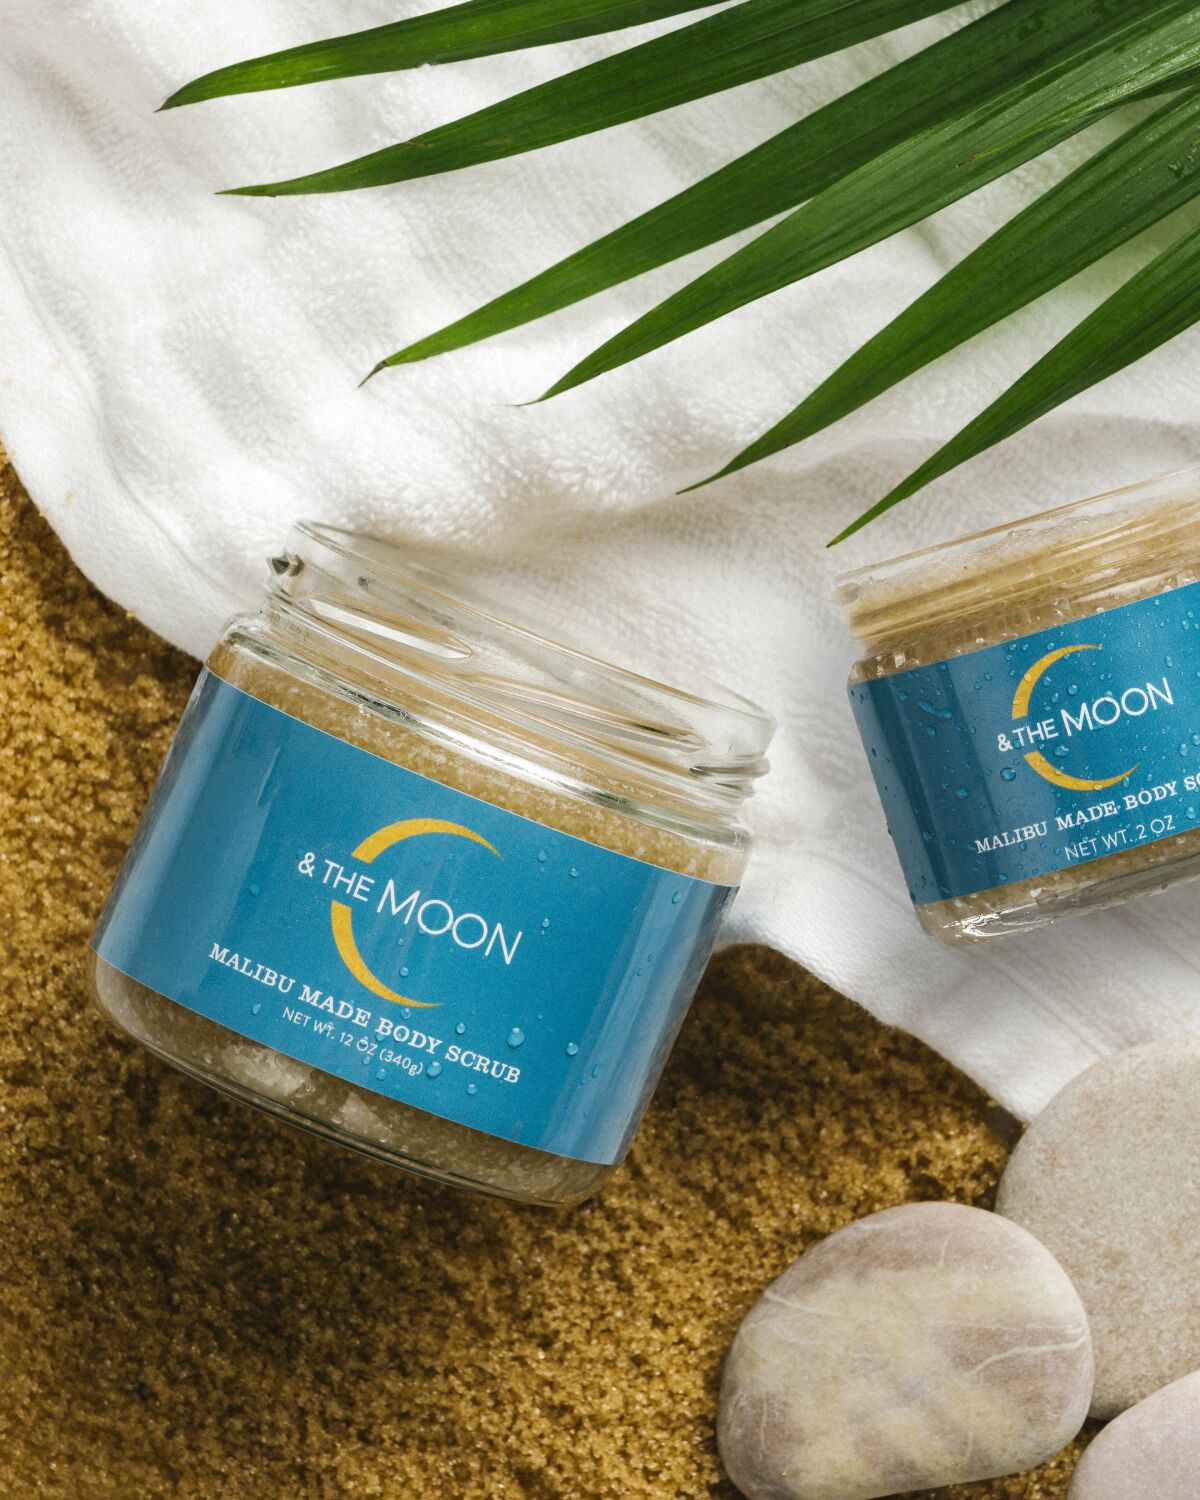 Carson Meyer's C & the Moon, an environmentally conscious skincare line, was inspired by Meyer's own sensitive skin. Mandy Moore, Kim Kardashian West and January Jones have all praised the brand's signature homemade brown-sugar body scrub on social media.